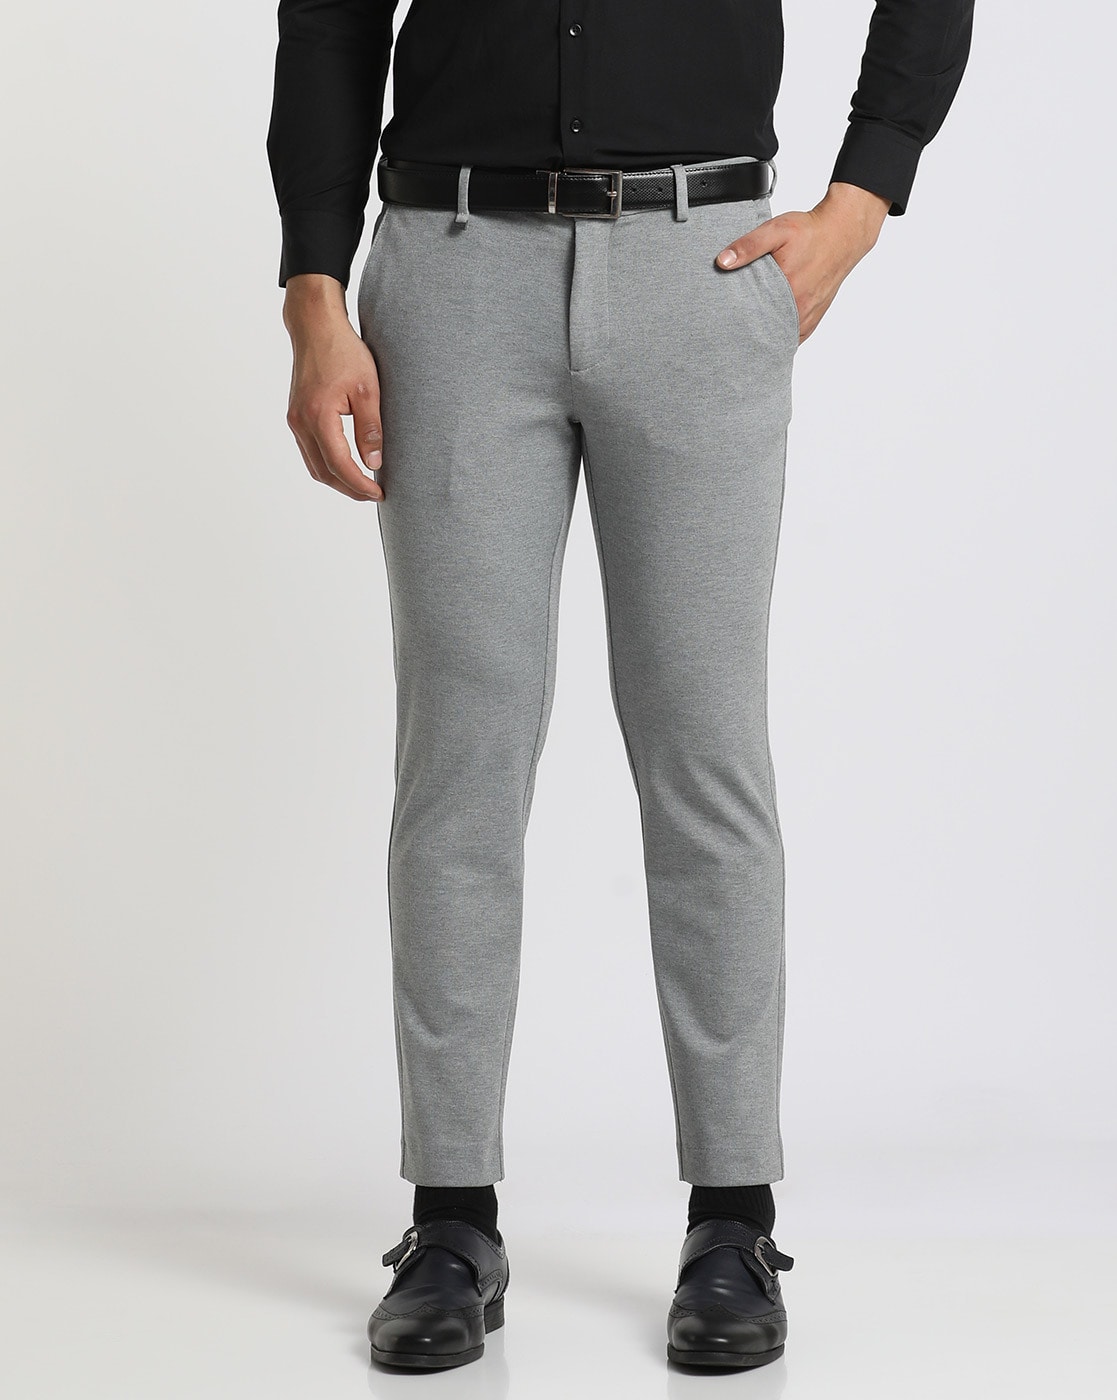 Buy Men's Feather Light Grey Pant Online | SNITCH